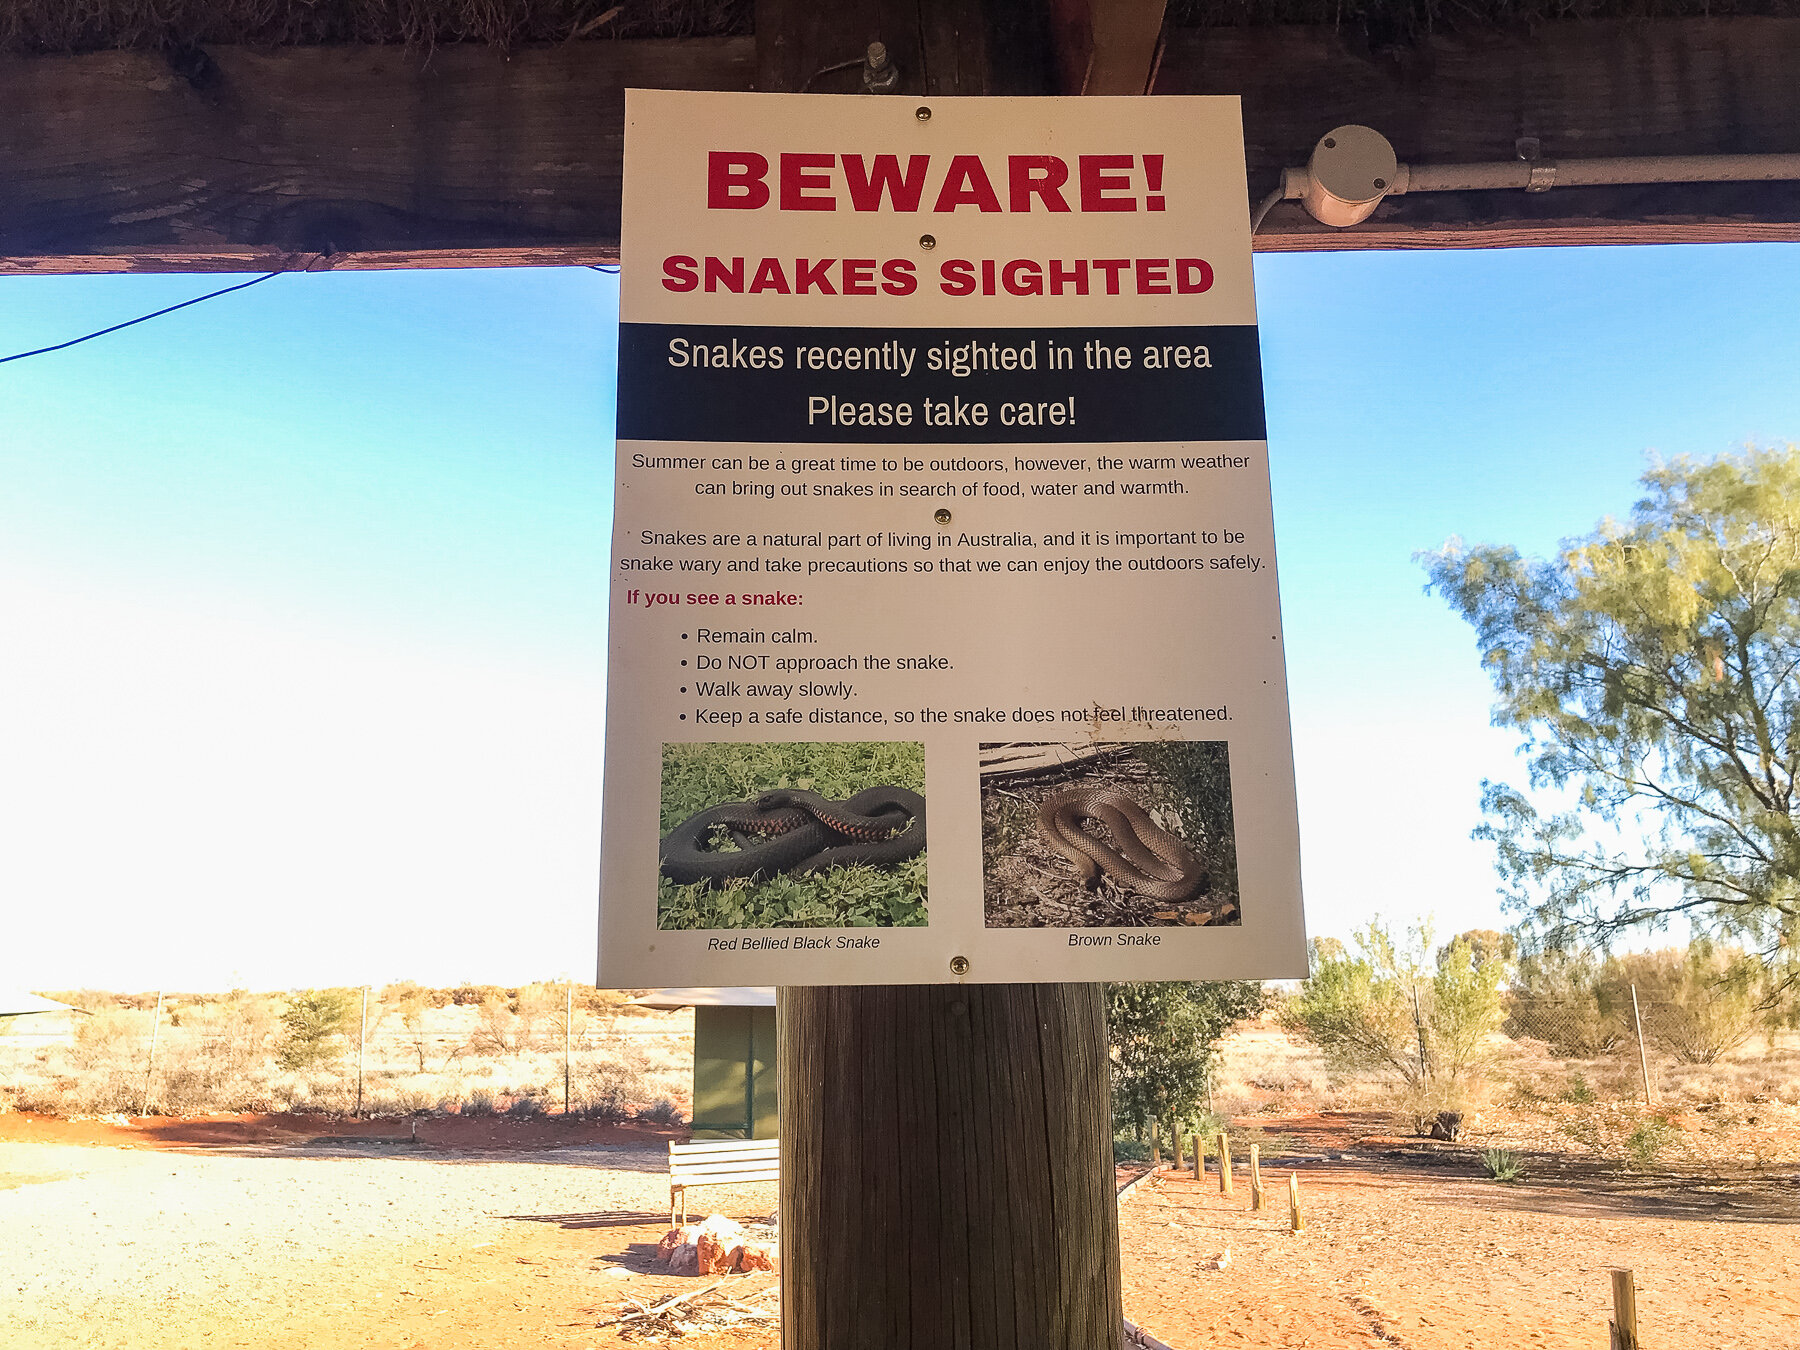  During my camping trip in Australia, I made sure to be cautious of snakes while walking or setting up my tent. To ensure my safety, I developed a routine to check the area before pitching my tent. This helped me avoid any potential danger and gave m